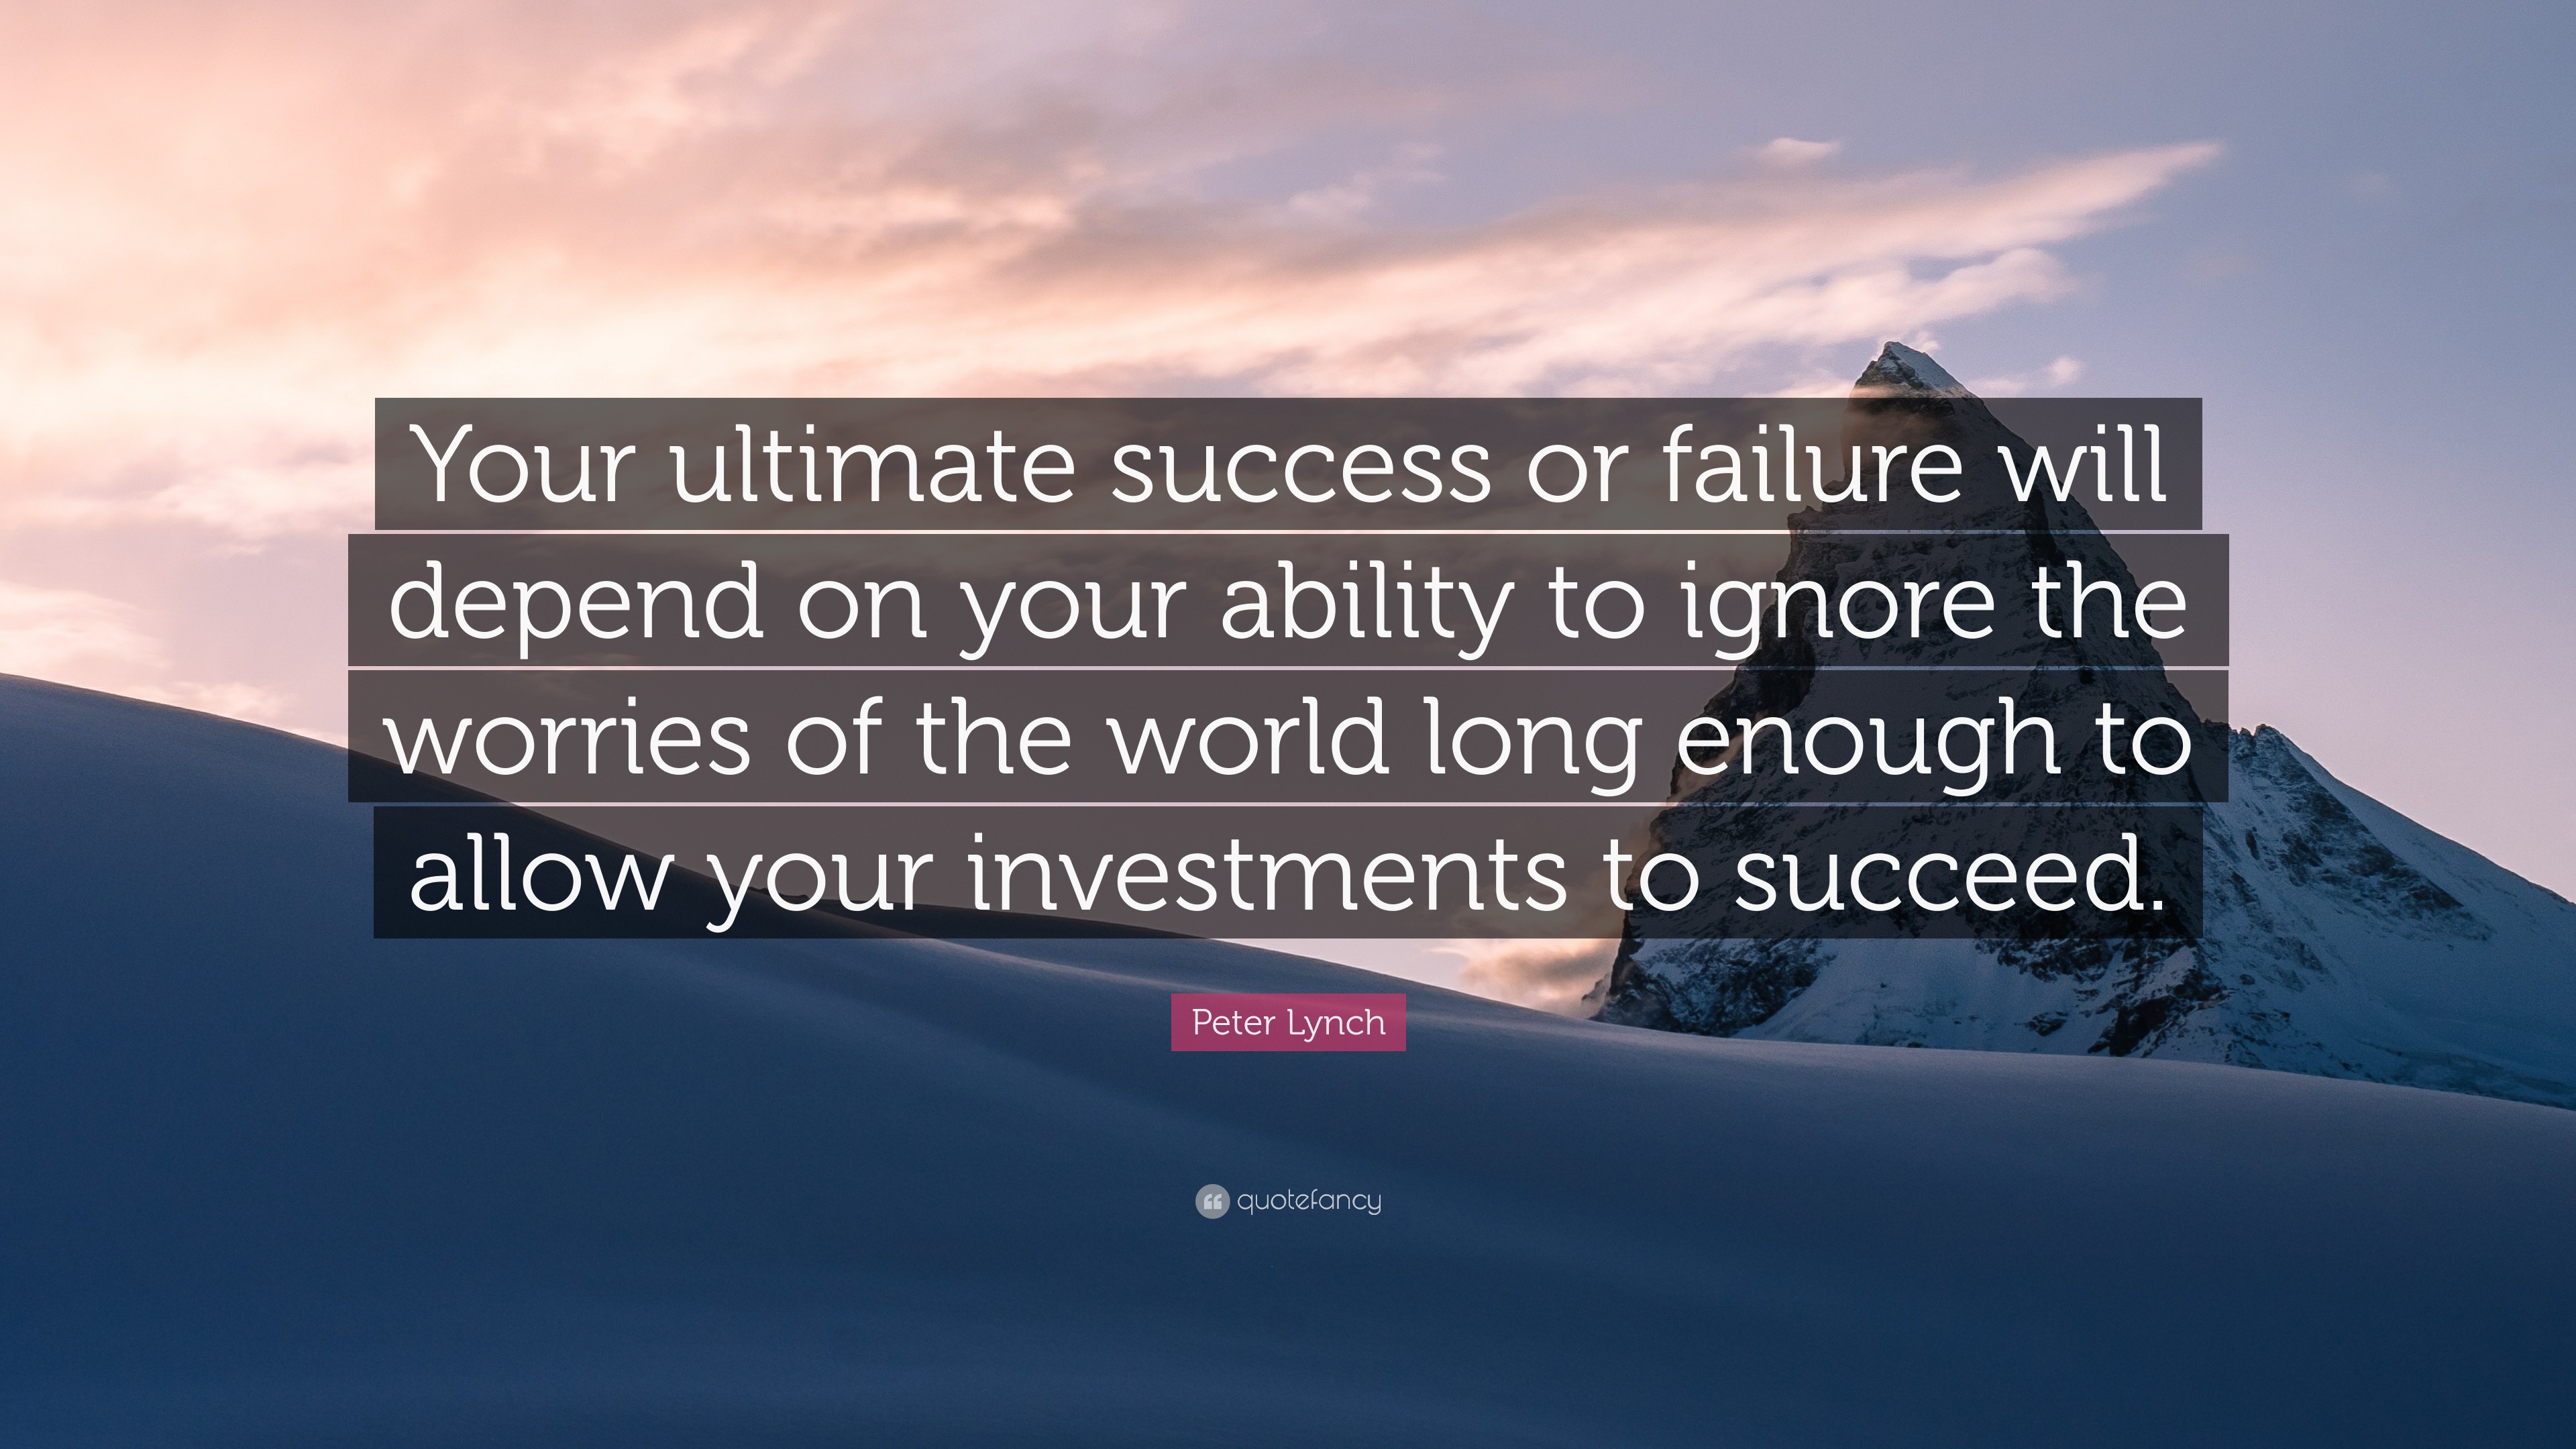 Peter Lynch Quote: “Your ultimate success or failure will depend on your  ability to ignore the worries of the world long enough to allow you”